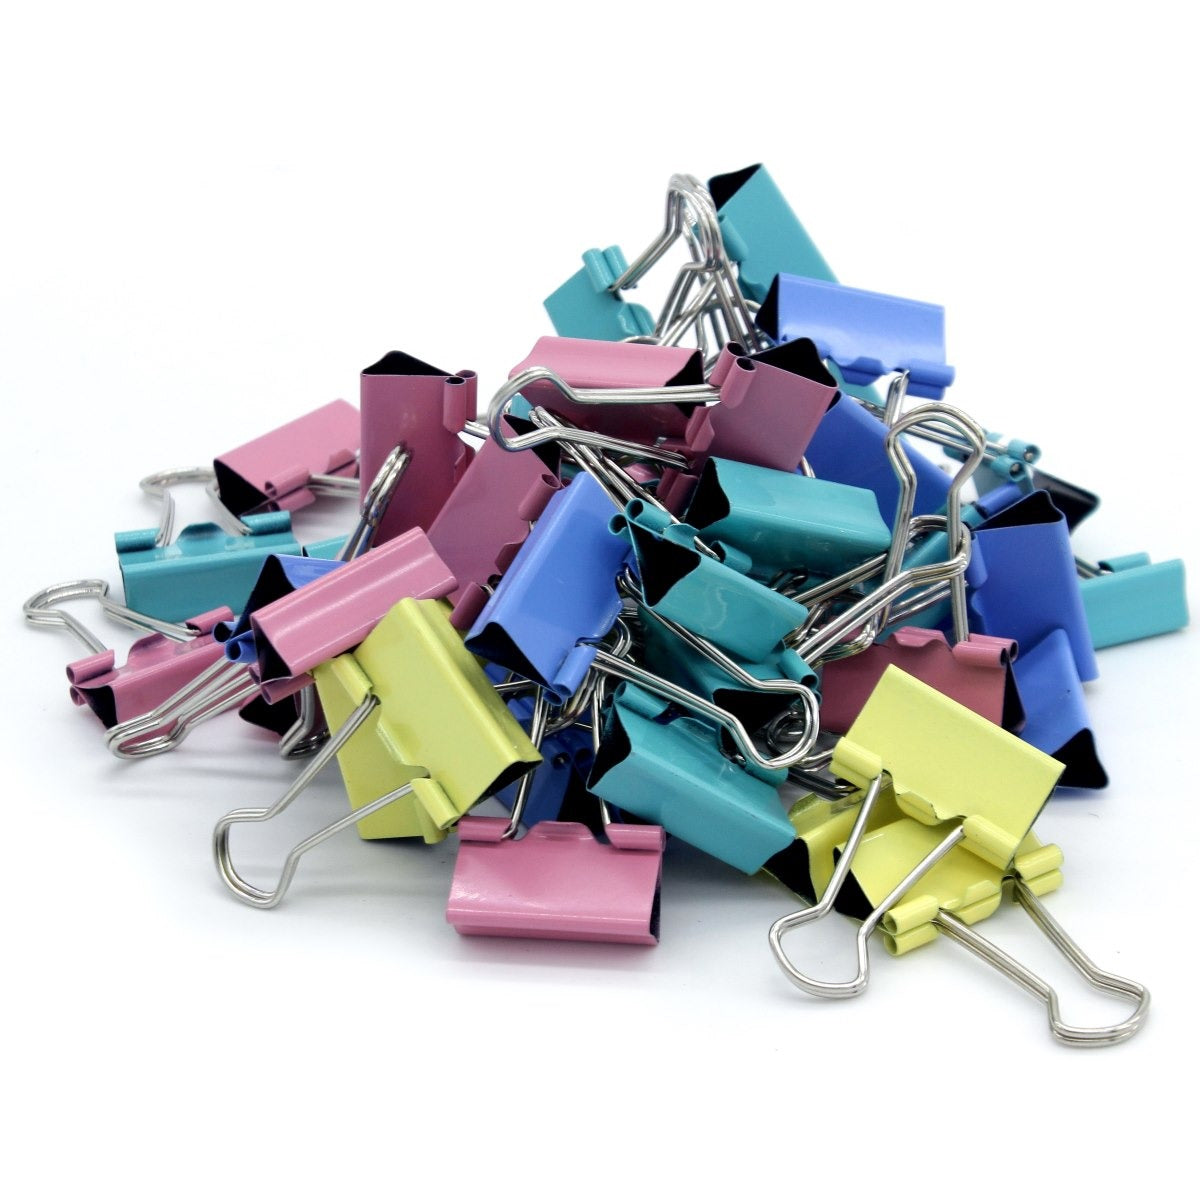 Set of 48 Pcs Binder Clips Assorted Colors 25mm - For Shops, Schools, Corporates, Office Use JABCC25MM